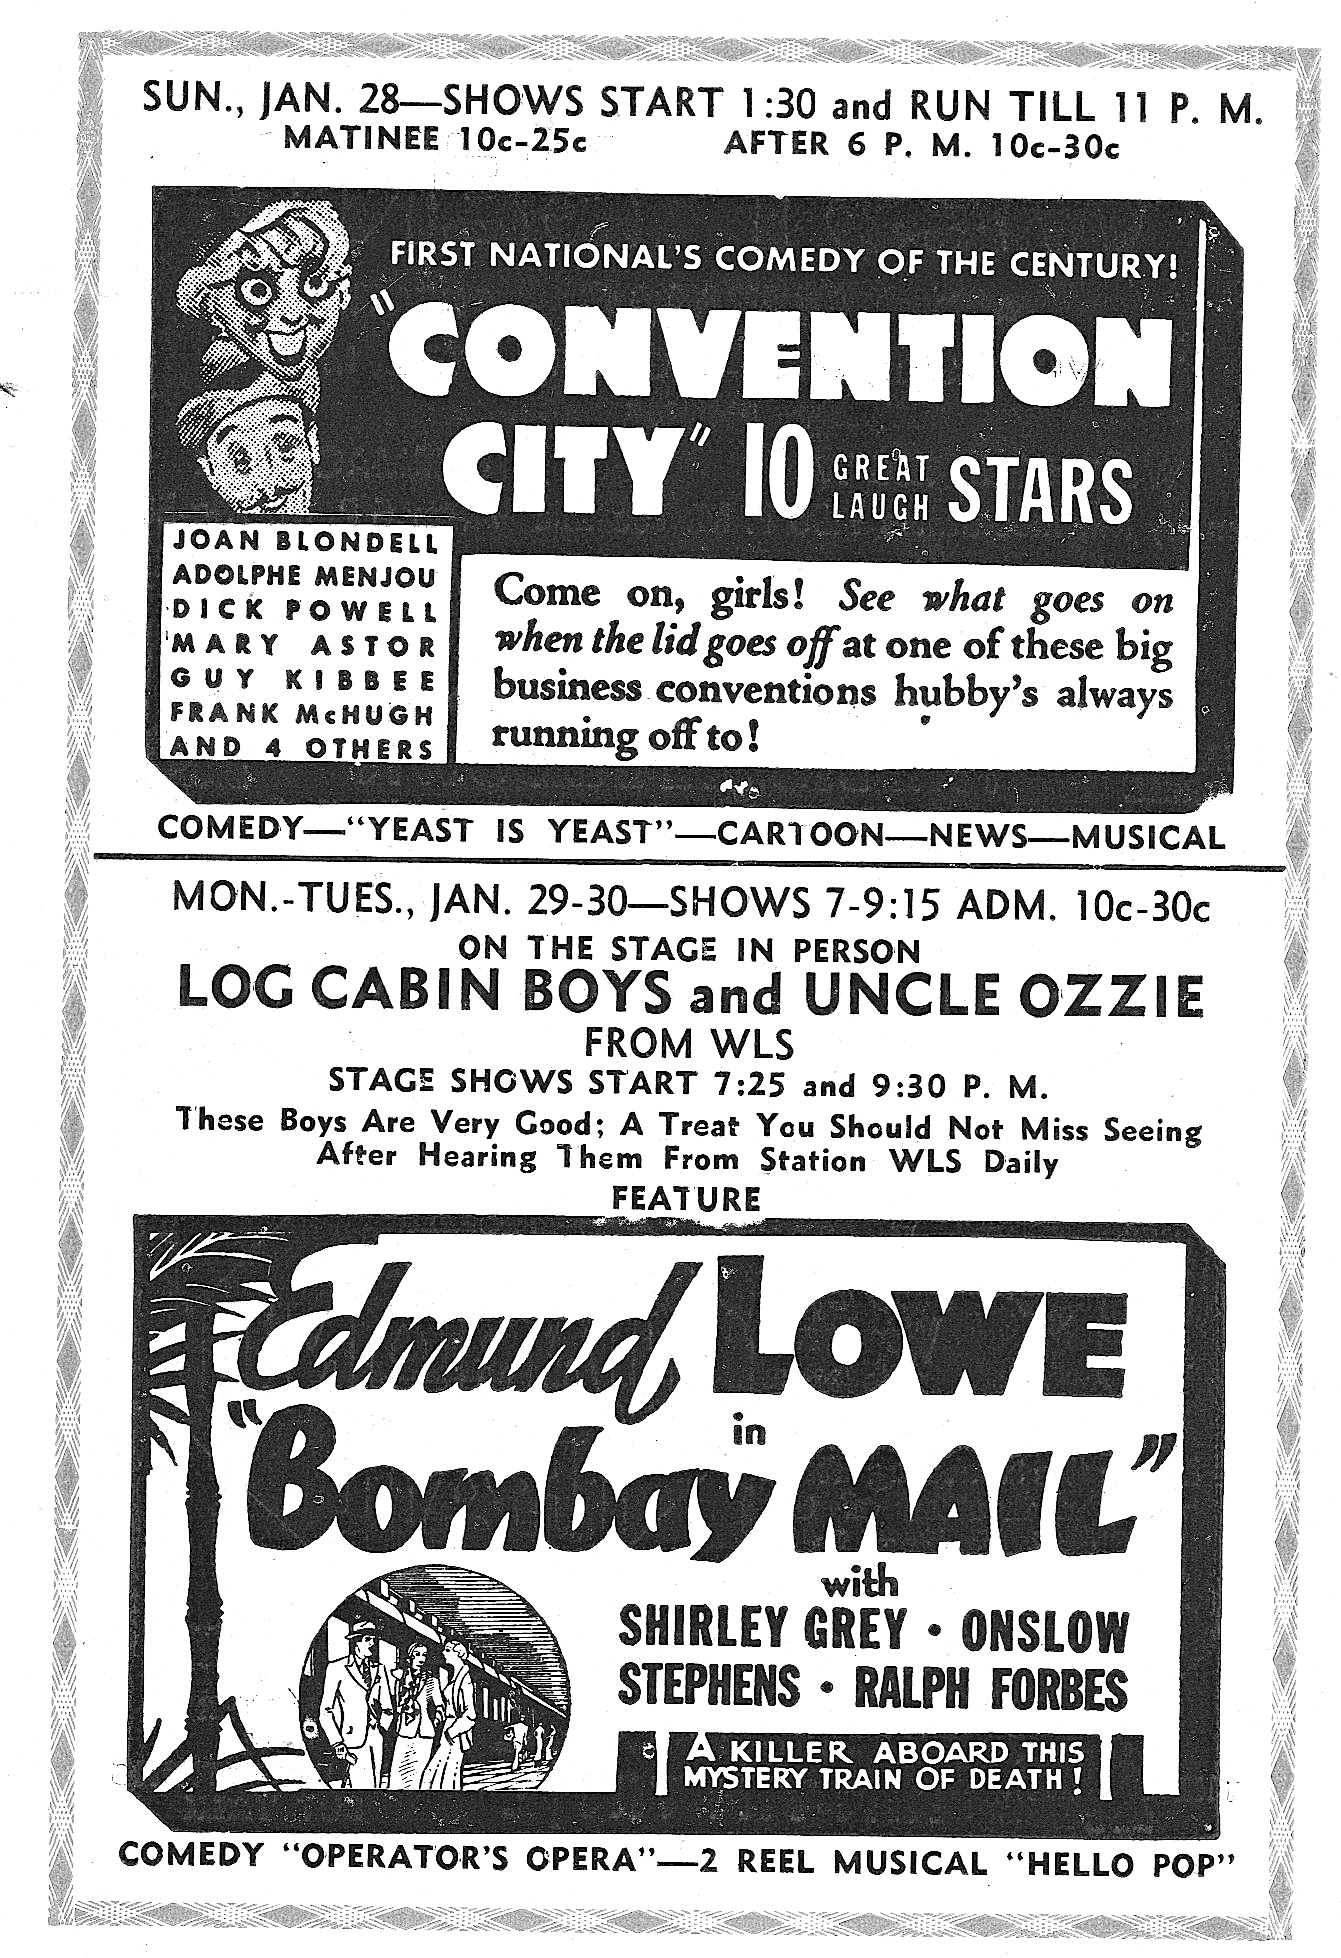 Chicago Ad, January 1934